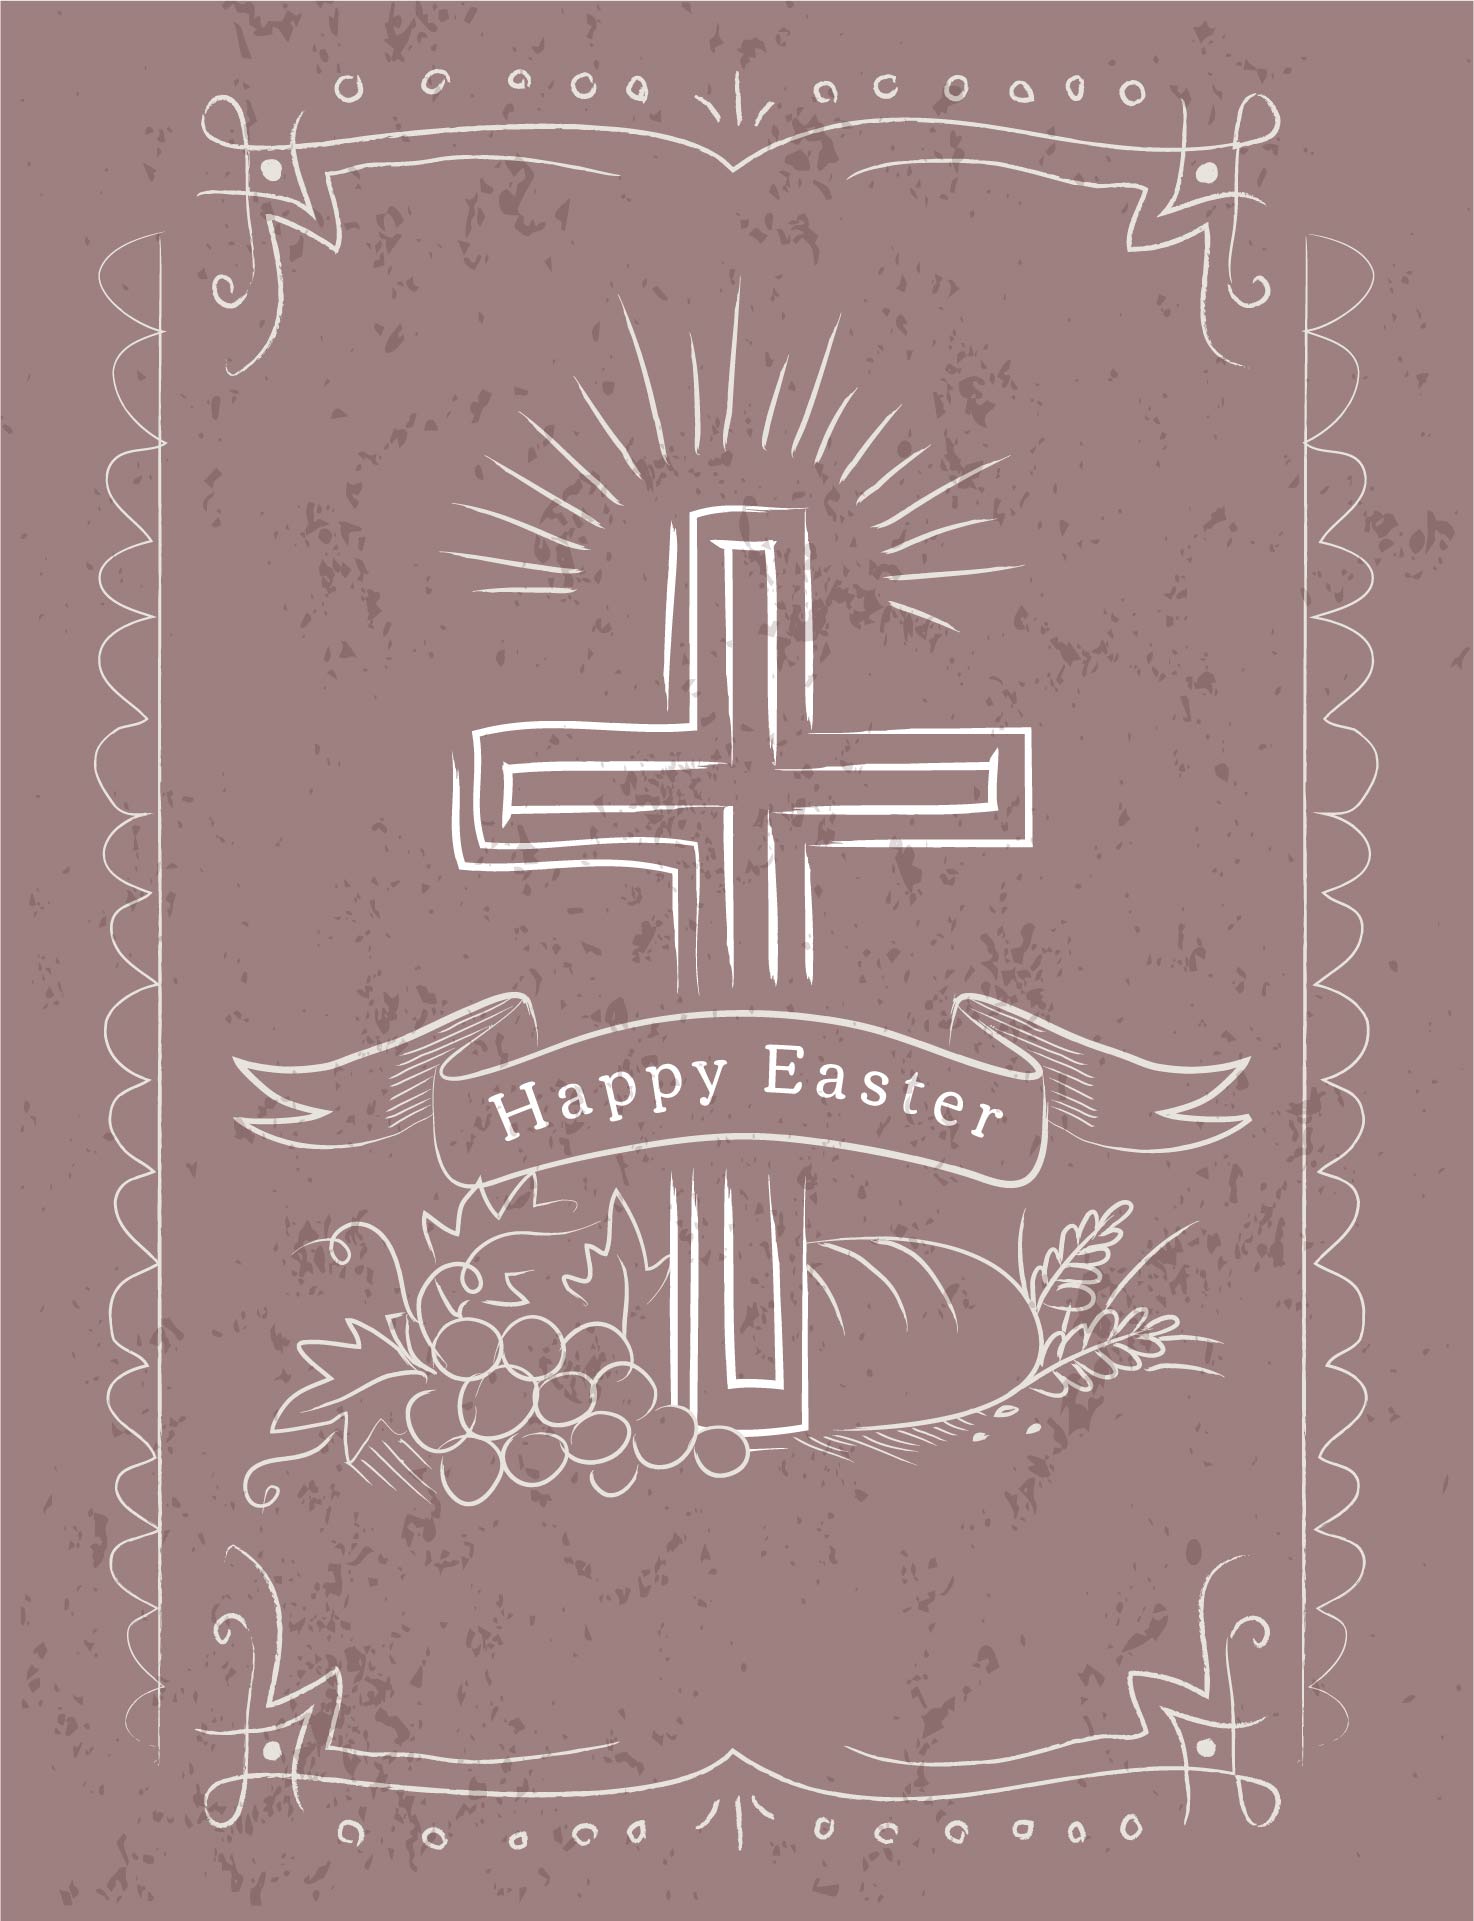 5-best-images-of-free-printable-easter-cards-religious-free-printable-www-vrogue-co